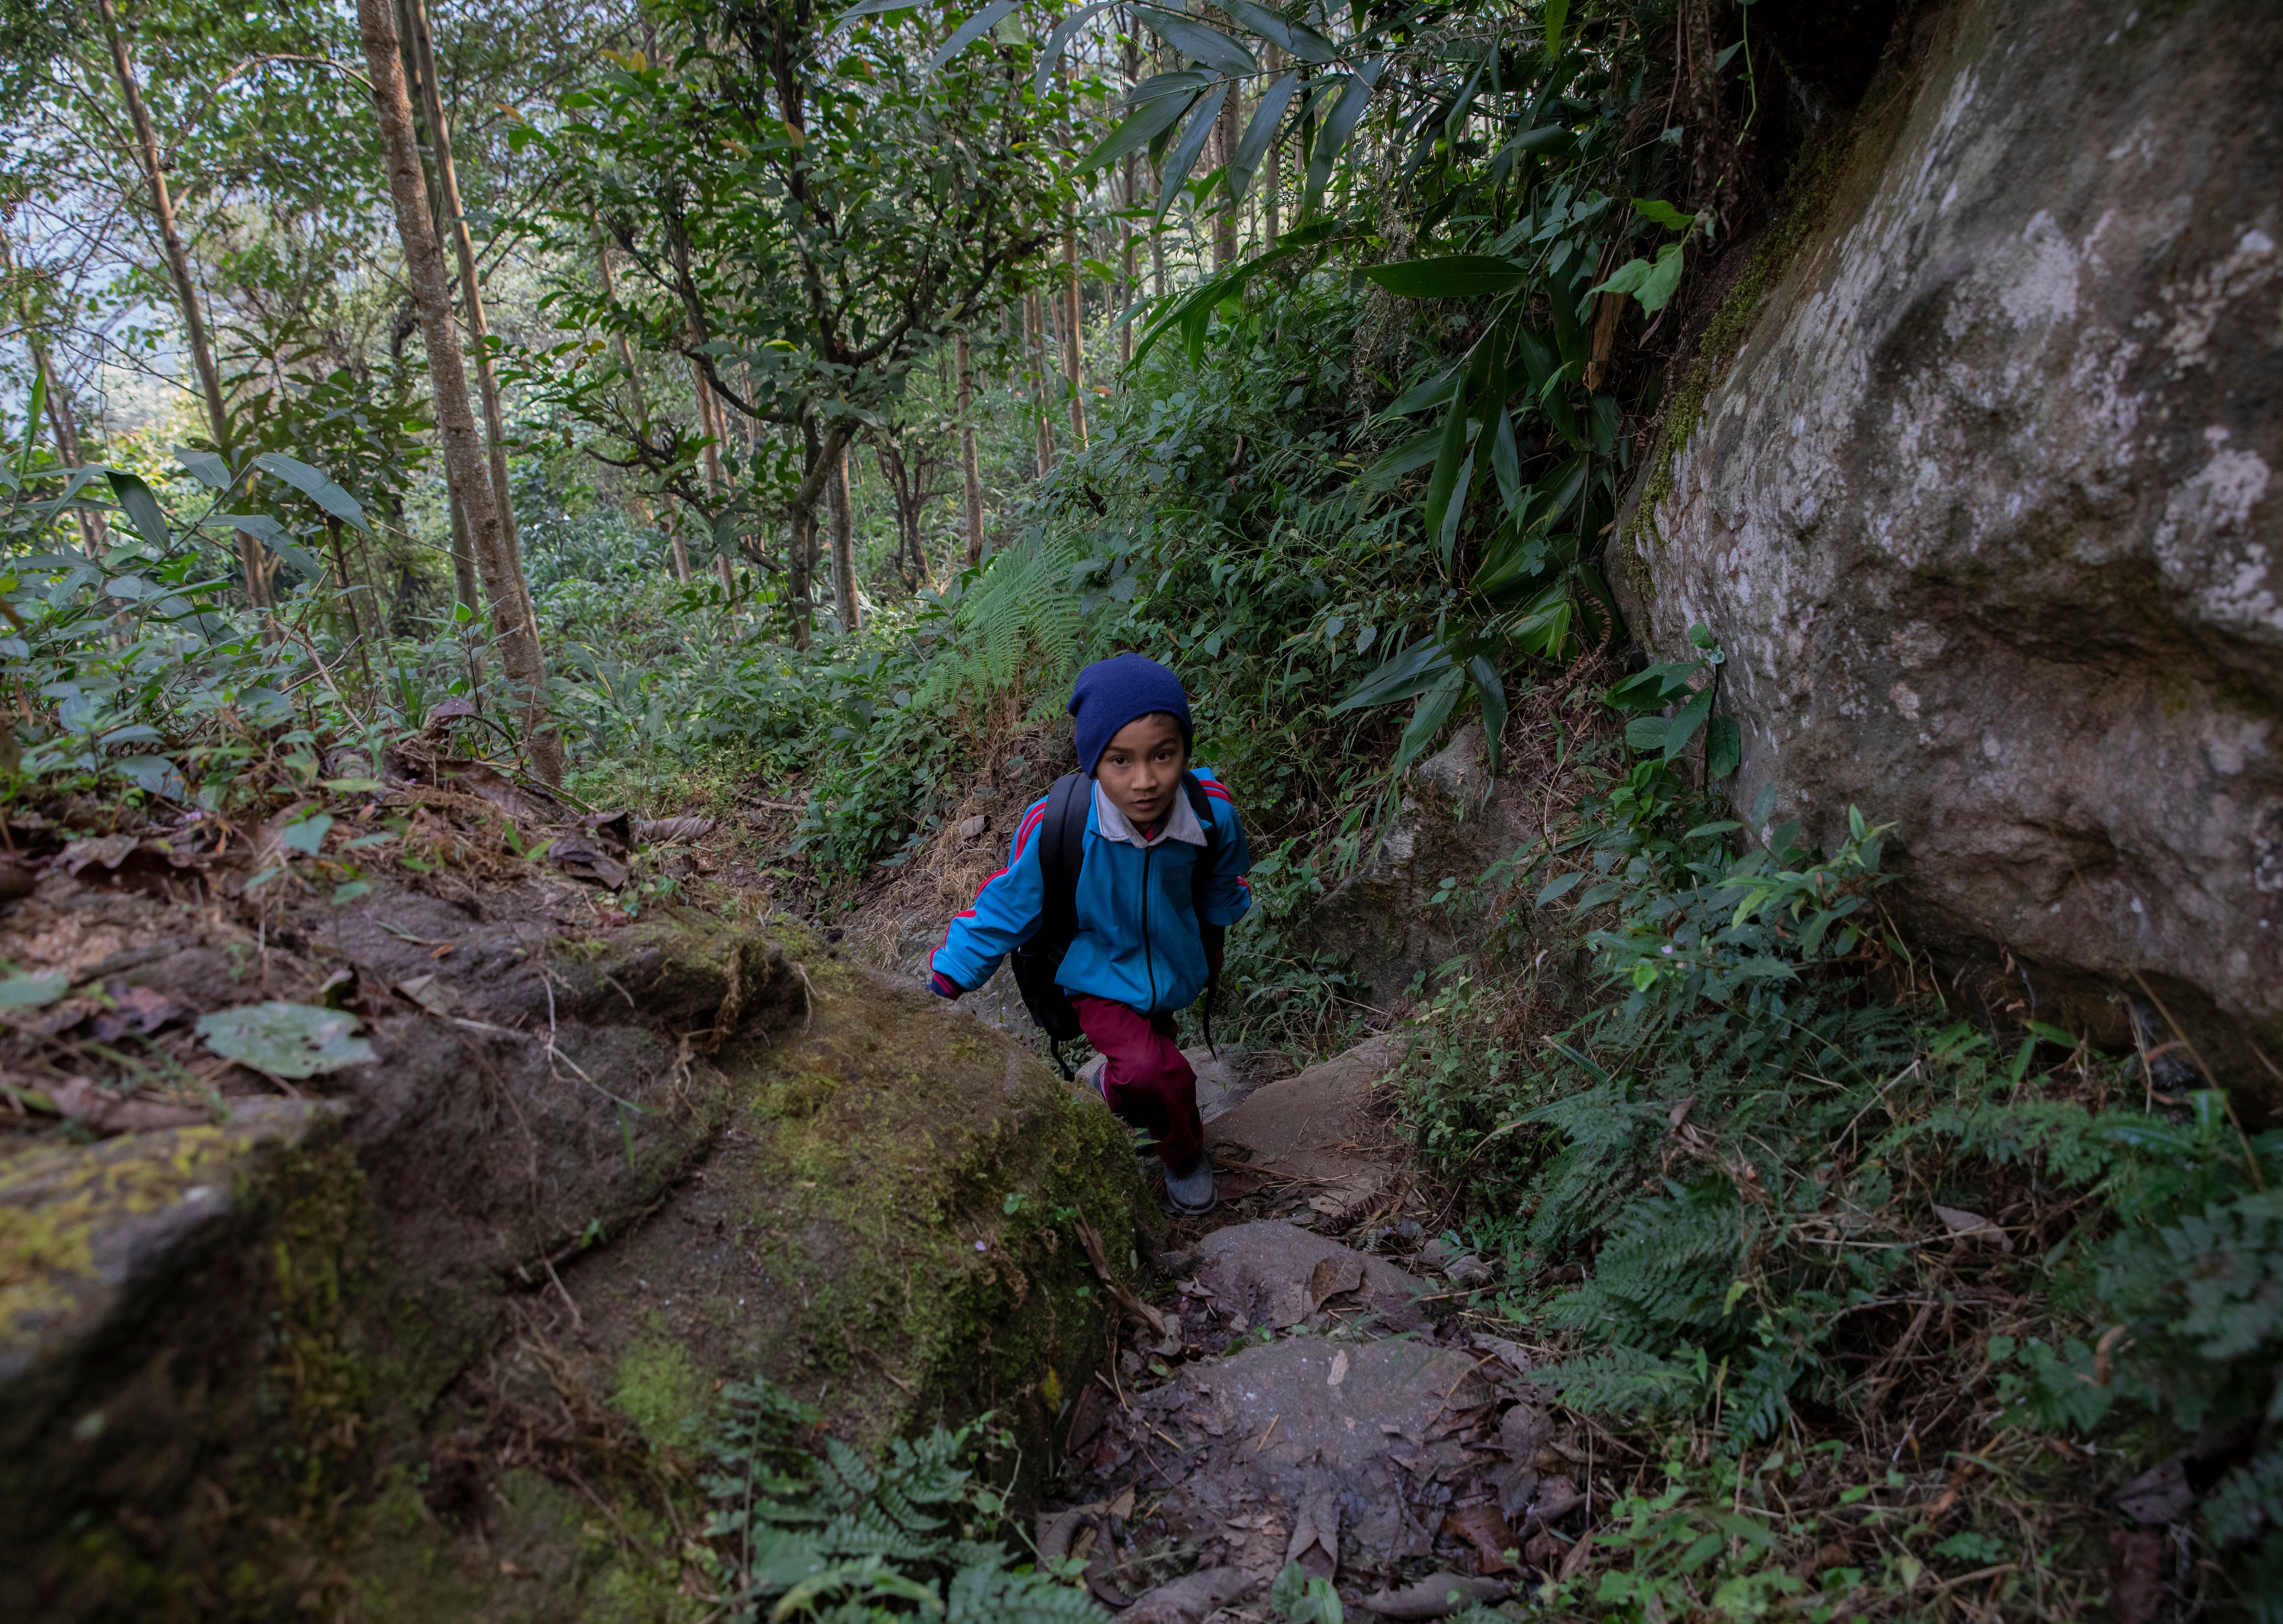 It takes over an hour each way for Amir, 6, to walk to school. The paths are treacherous and during times of heavy rainfall and storms there is a high chance of landslides and floods.